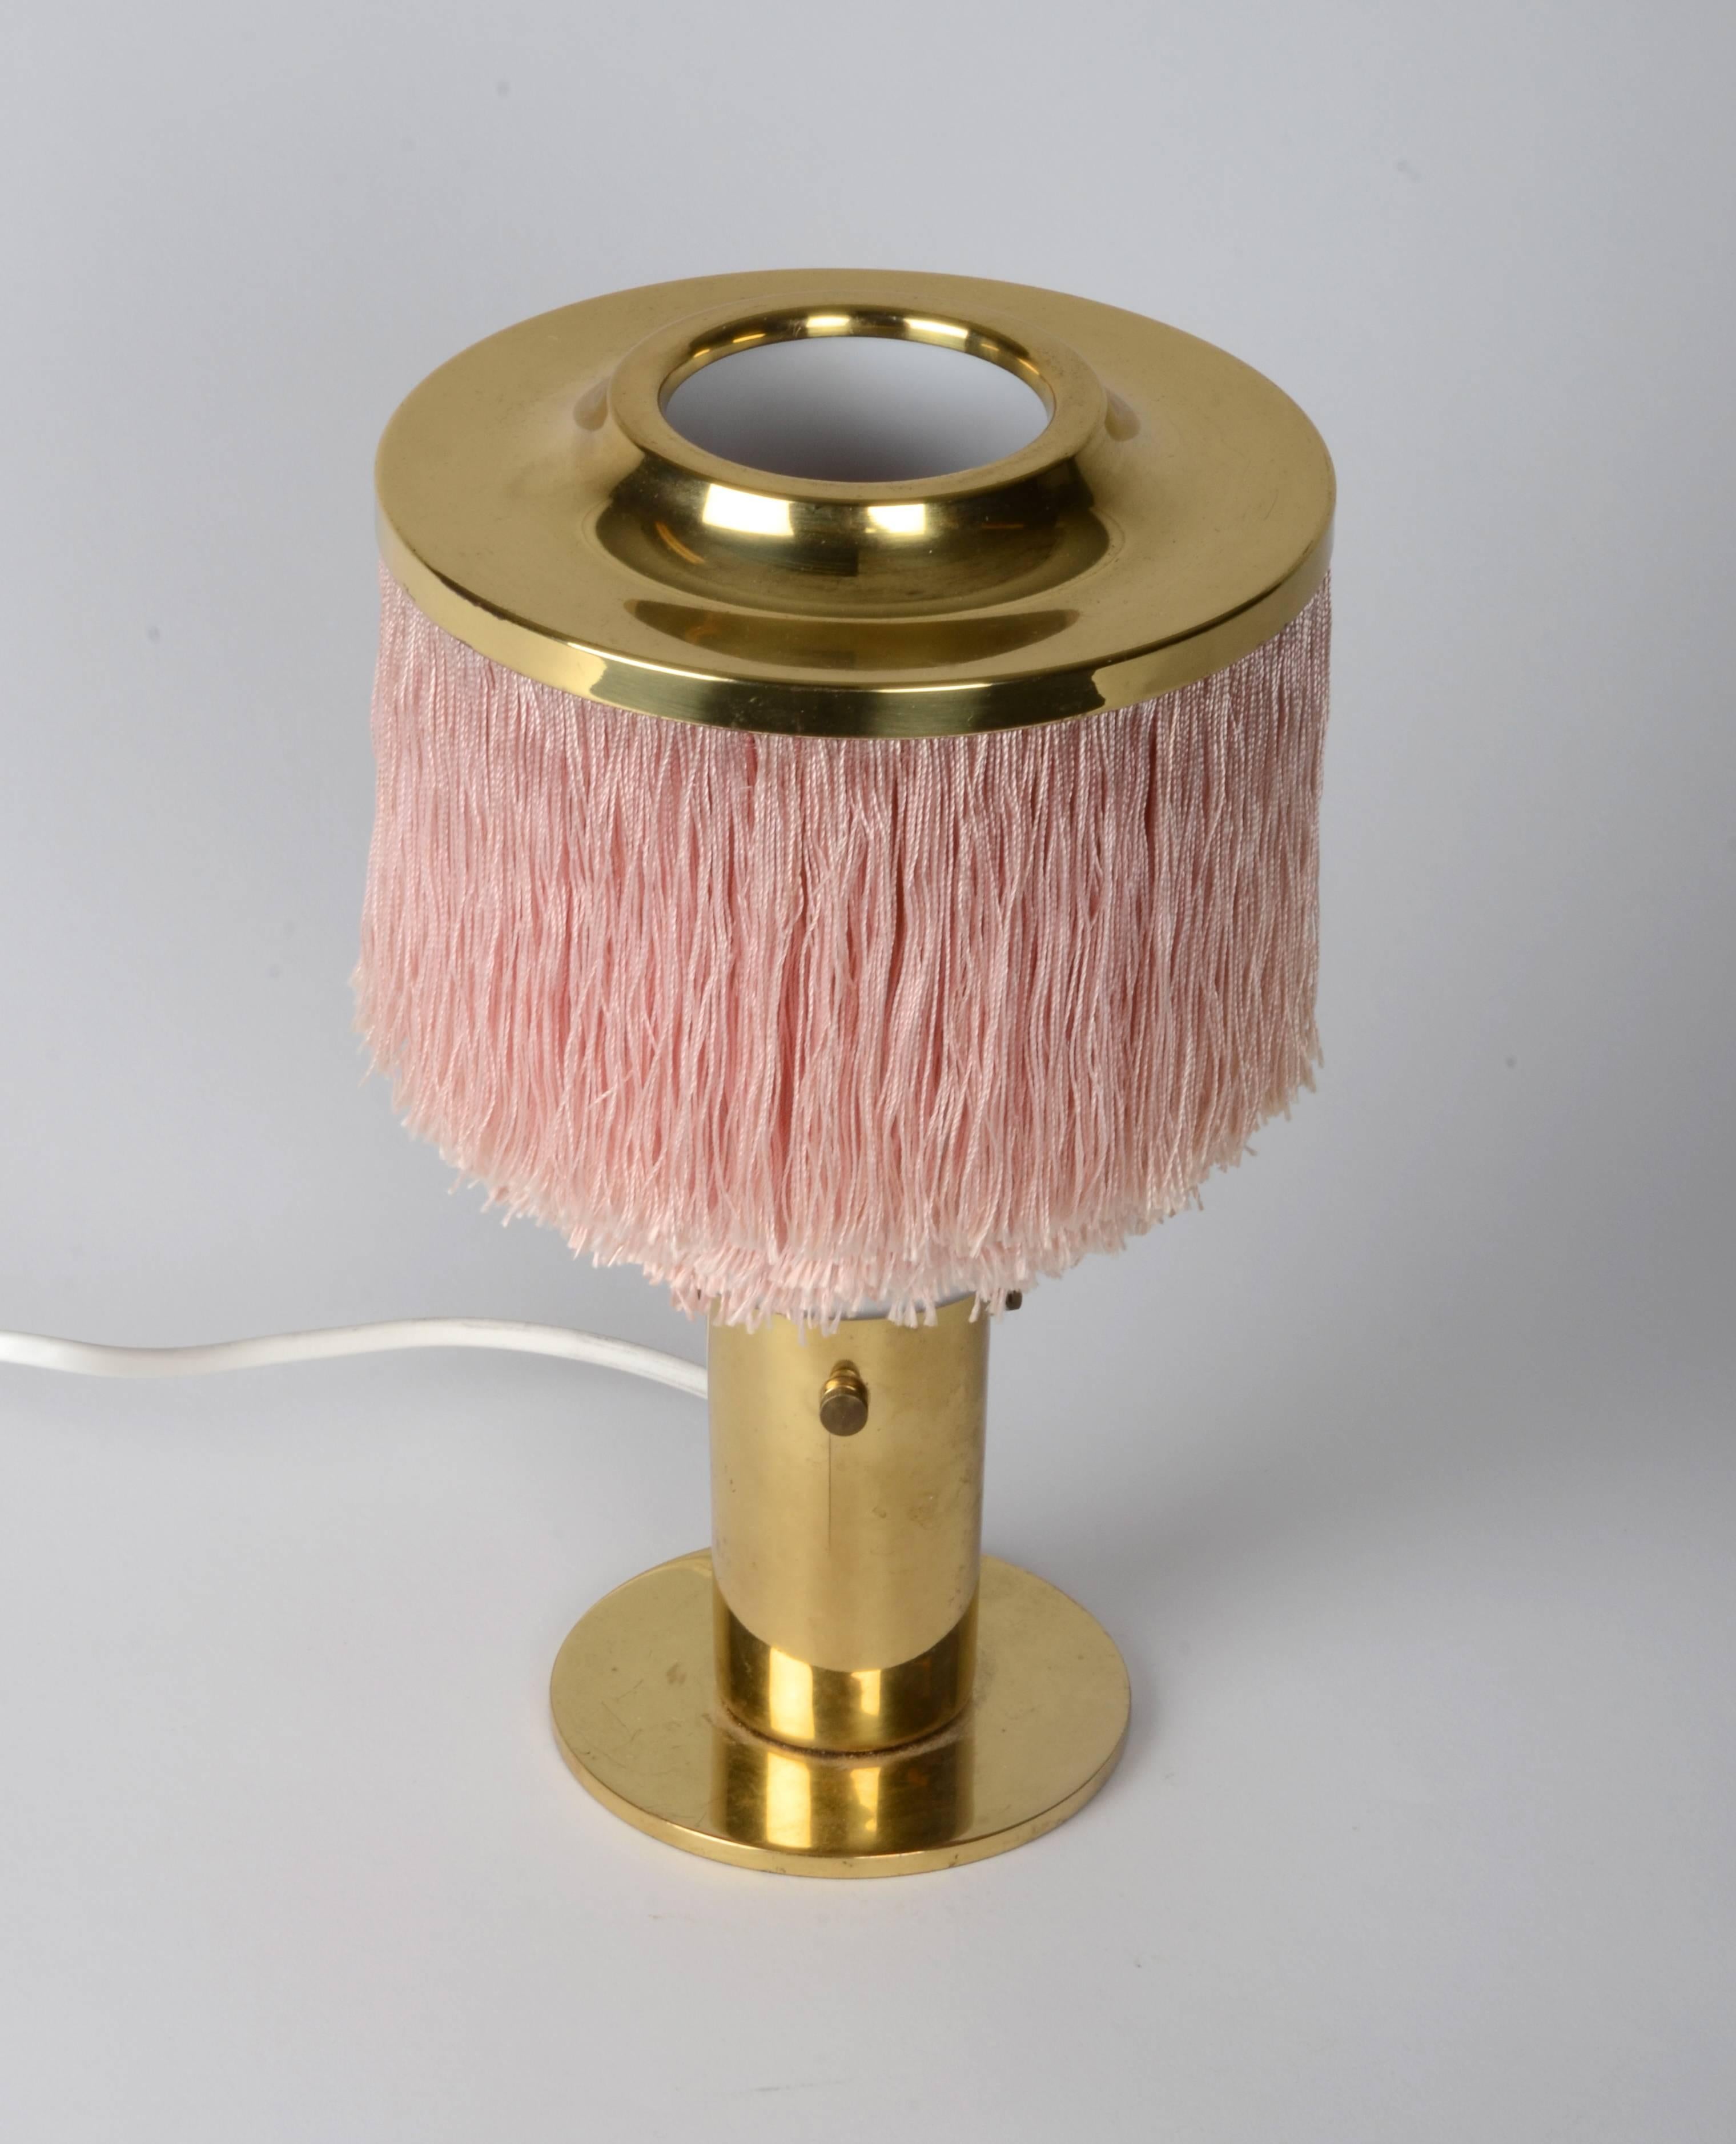 Table lamp in brass with silk fringe, designed by Hans-Agne Jakobsson for Markaryd, 1960s.

